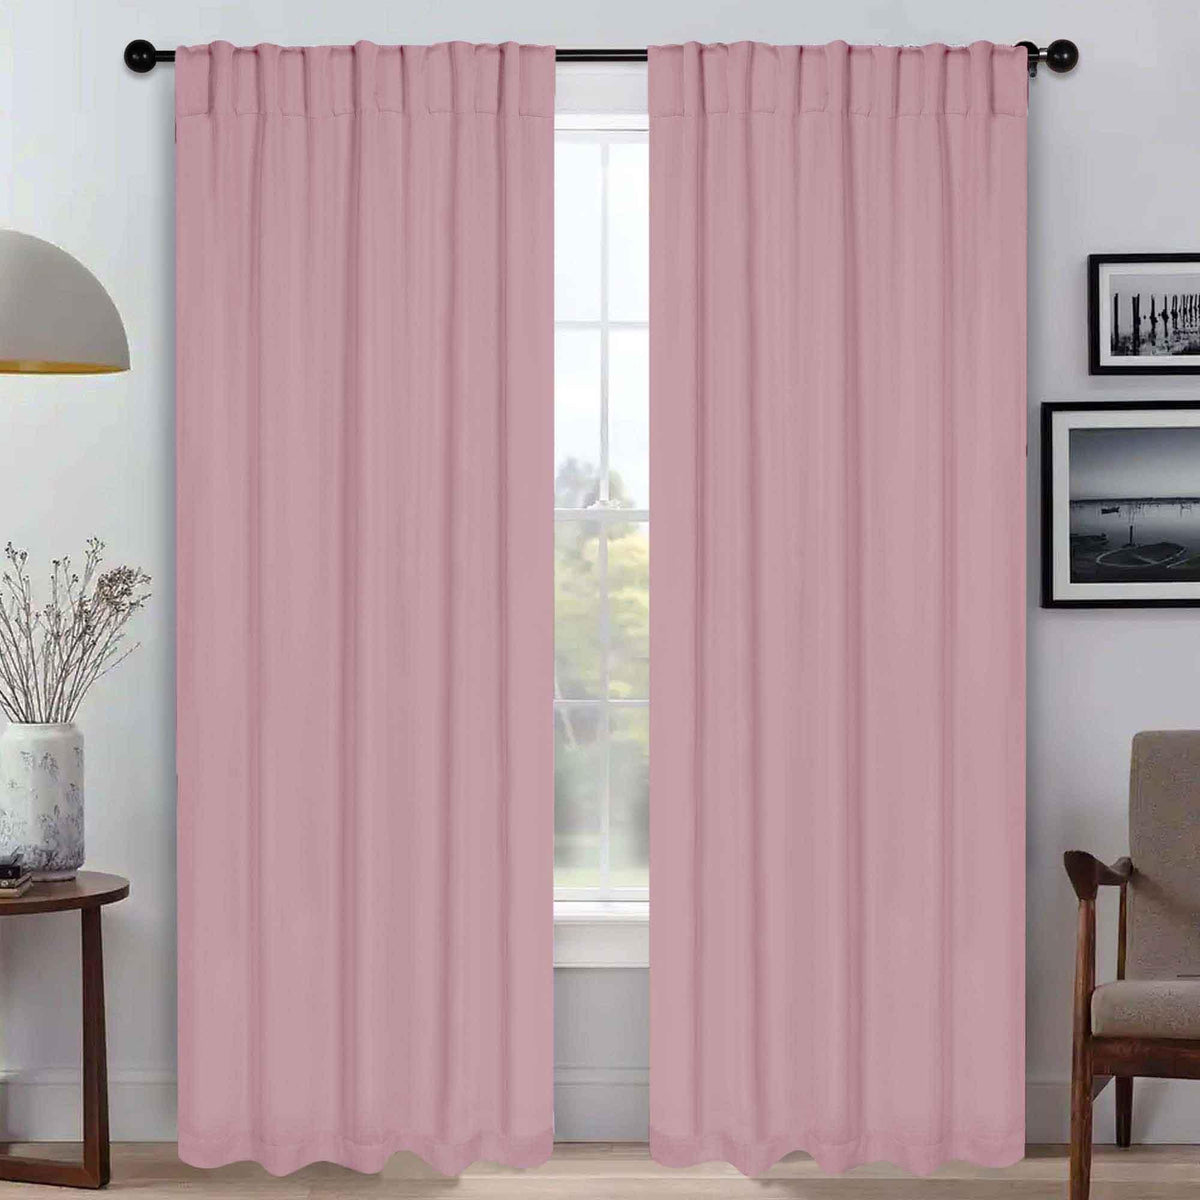 Solid Room Darkening Blackout Curtain Panels, Back Tabs, Set of 2 - Blackout Curtains by Superior - Superior 